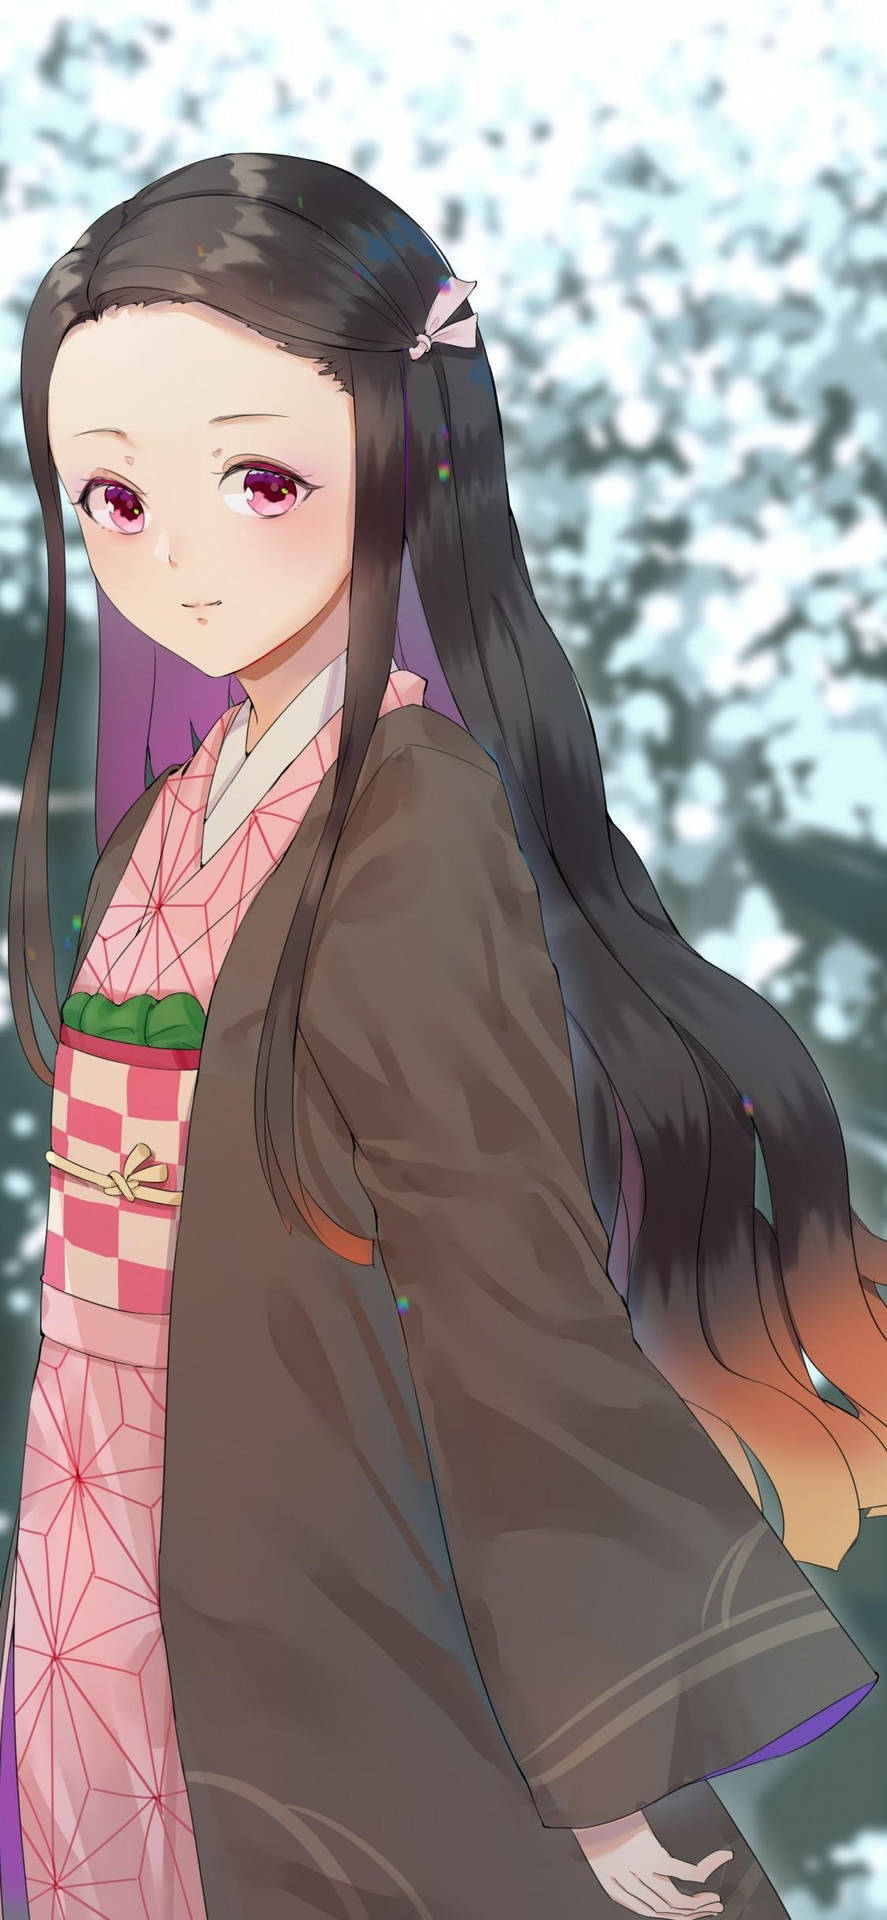 Nezuko shows her devilish side with a powerful new Iphone Wallpaper